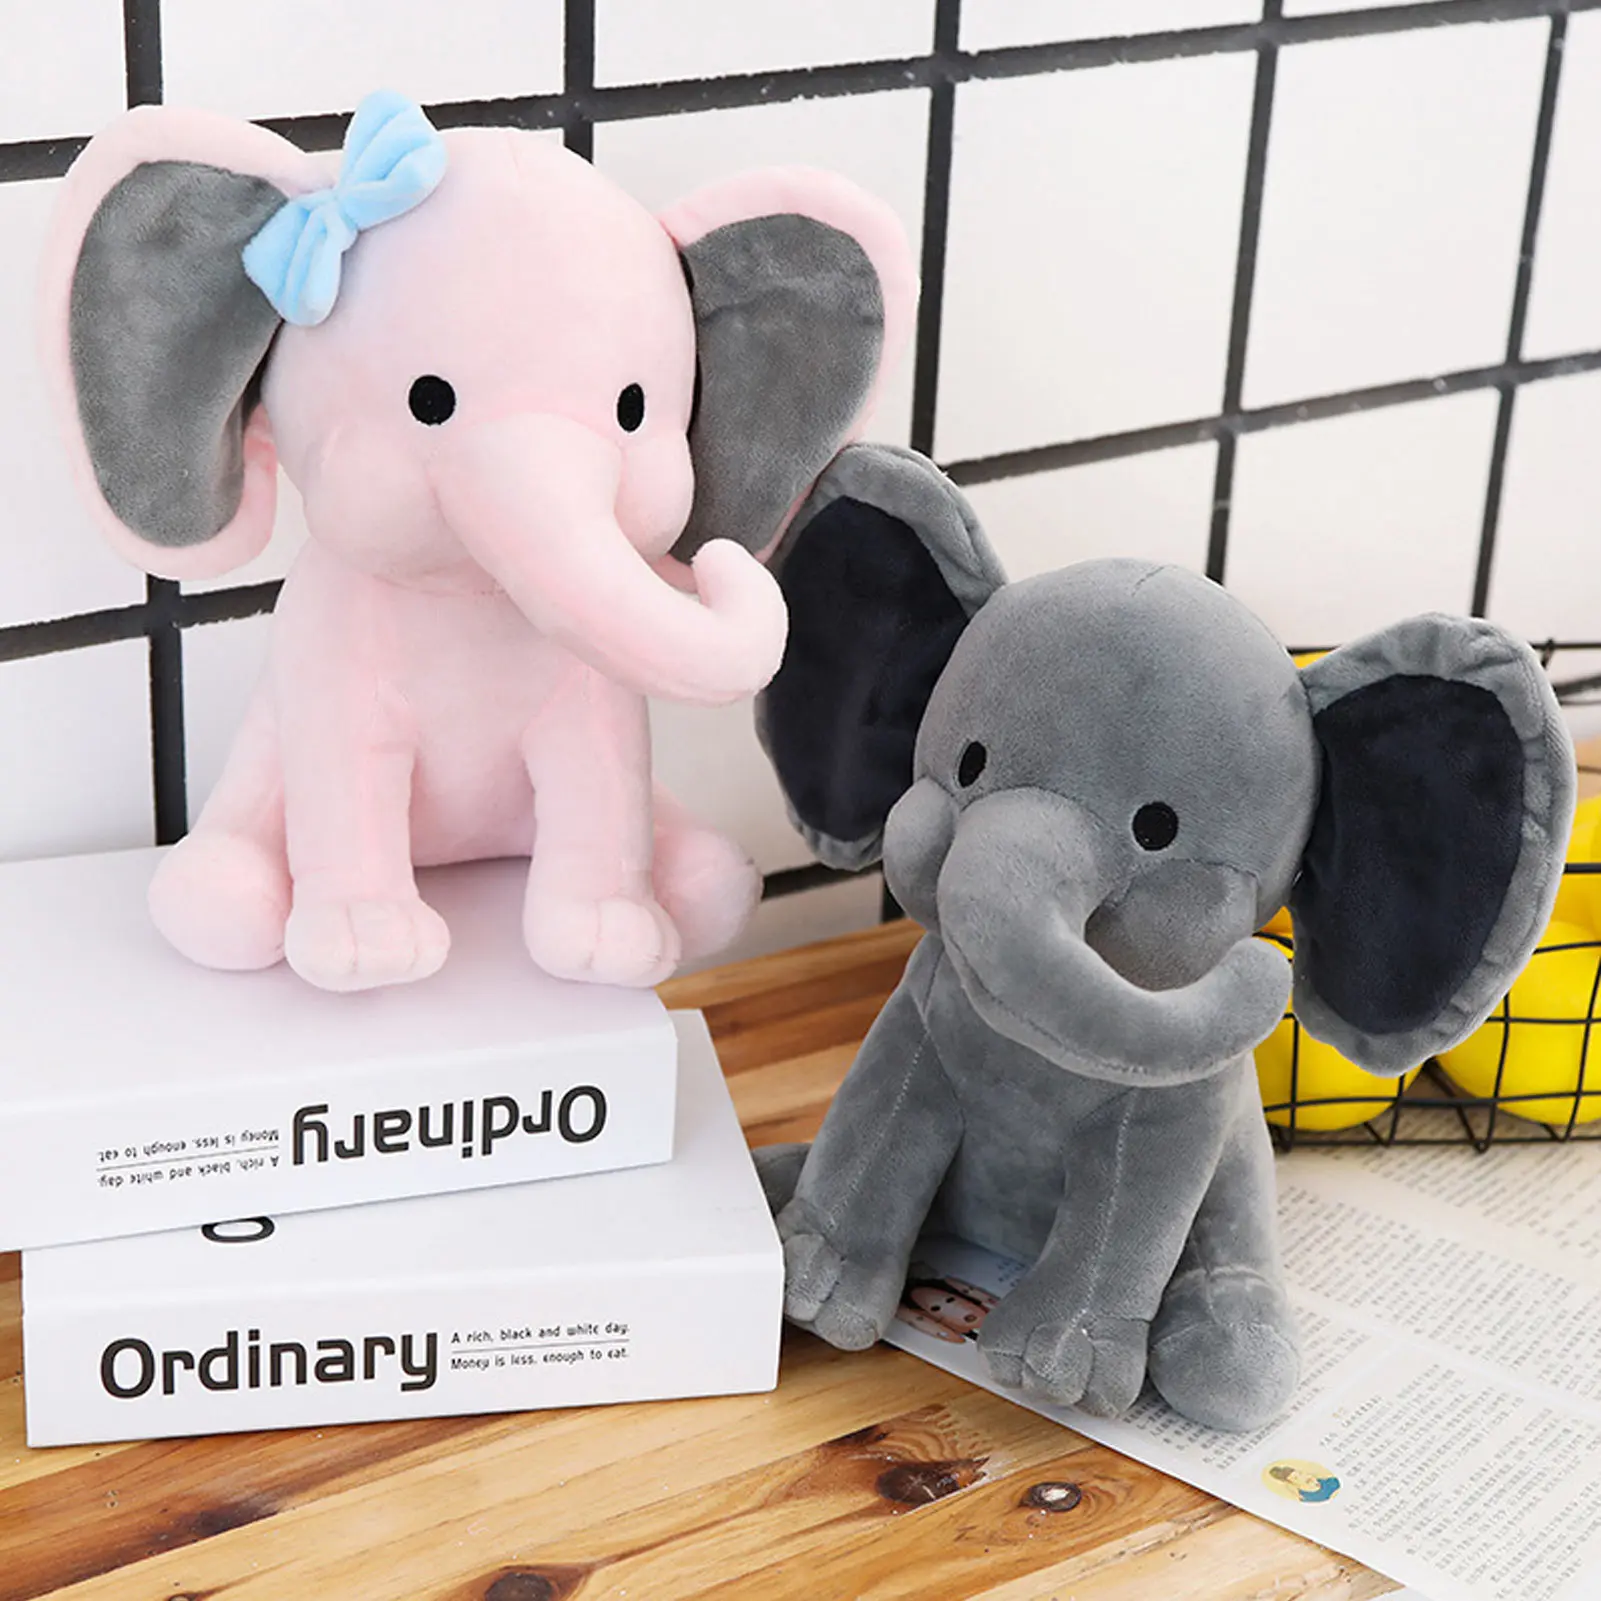 Elephant Plush Toy Multipurpose Cute Safe Comfortable Soft Fluffy Stuffed Animal Toy for Kids Home Decor Sofa Ornament 25CM 220v electric foot warmer heater multipurpose winters heated pad washable plush temperature control foot insoles warming cushion